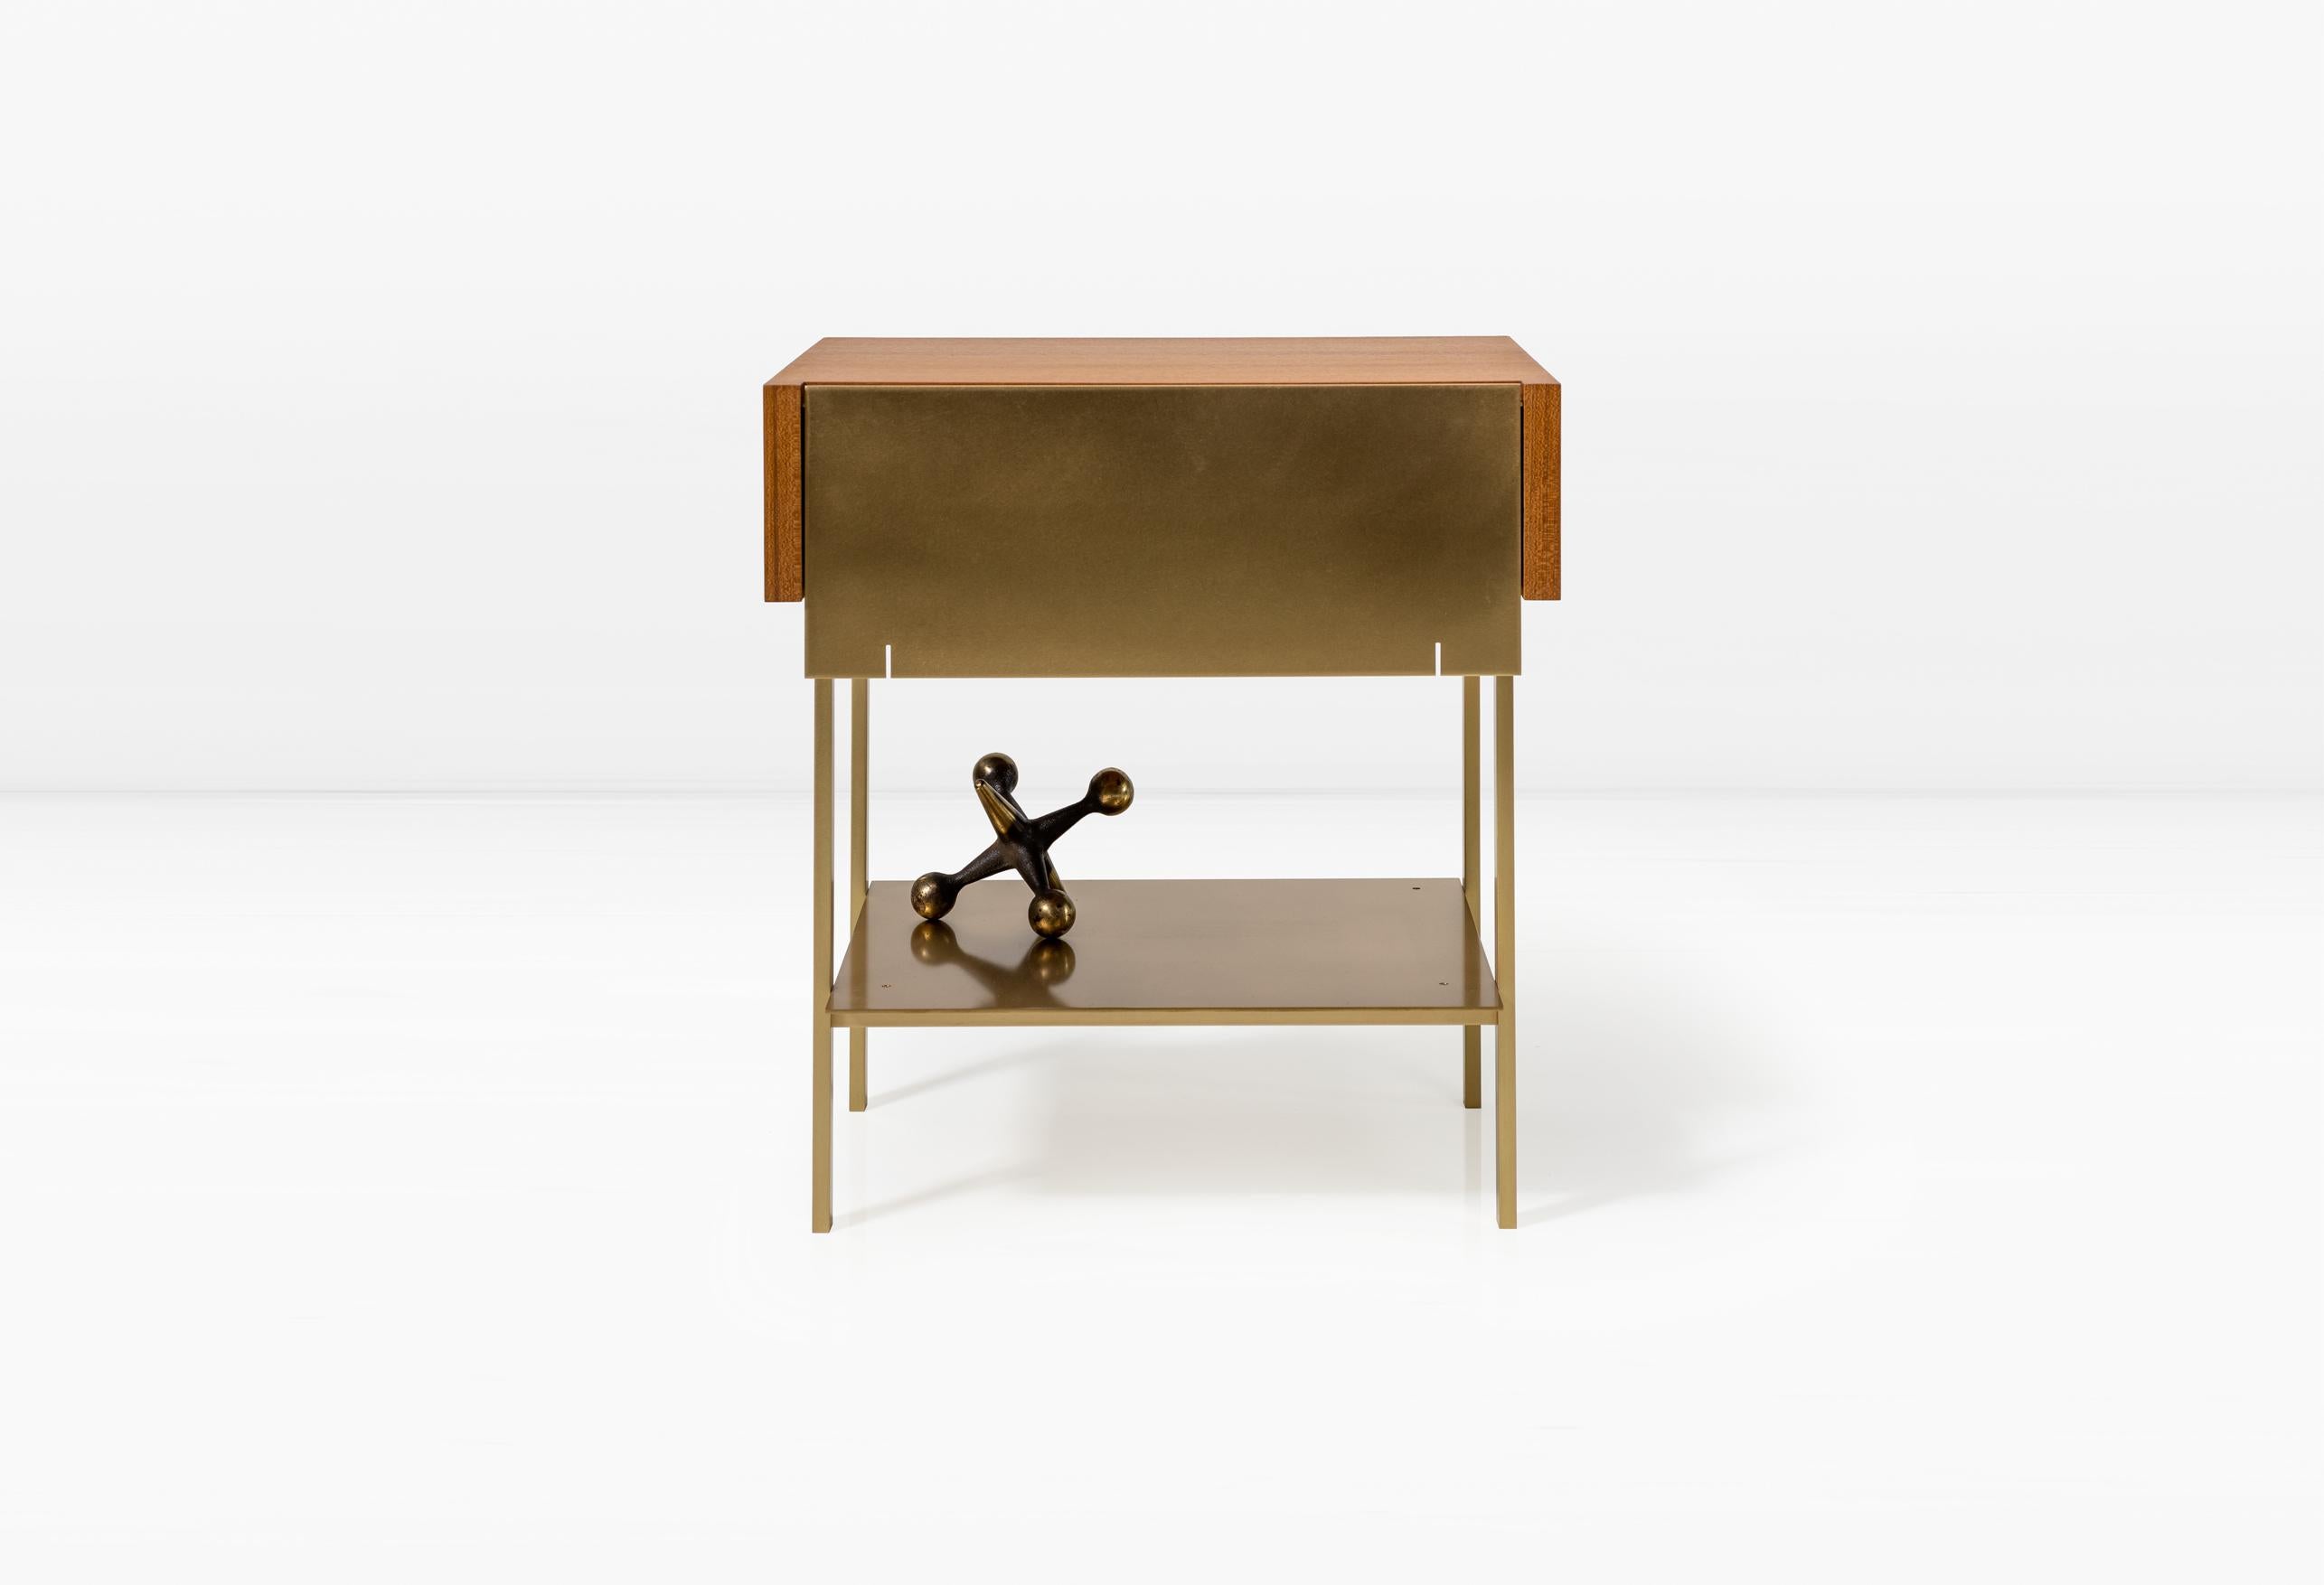 In a juxtaposition of two- and three-dimensional forms, the Hearns End Table combines planes of solid brass with a wooden volume. The drawer is accessed via a recess in the wood to eliminate the need for a pull.

This is a natural product that may